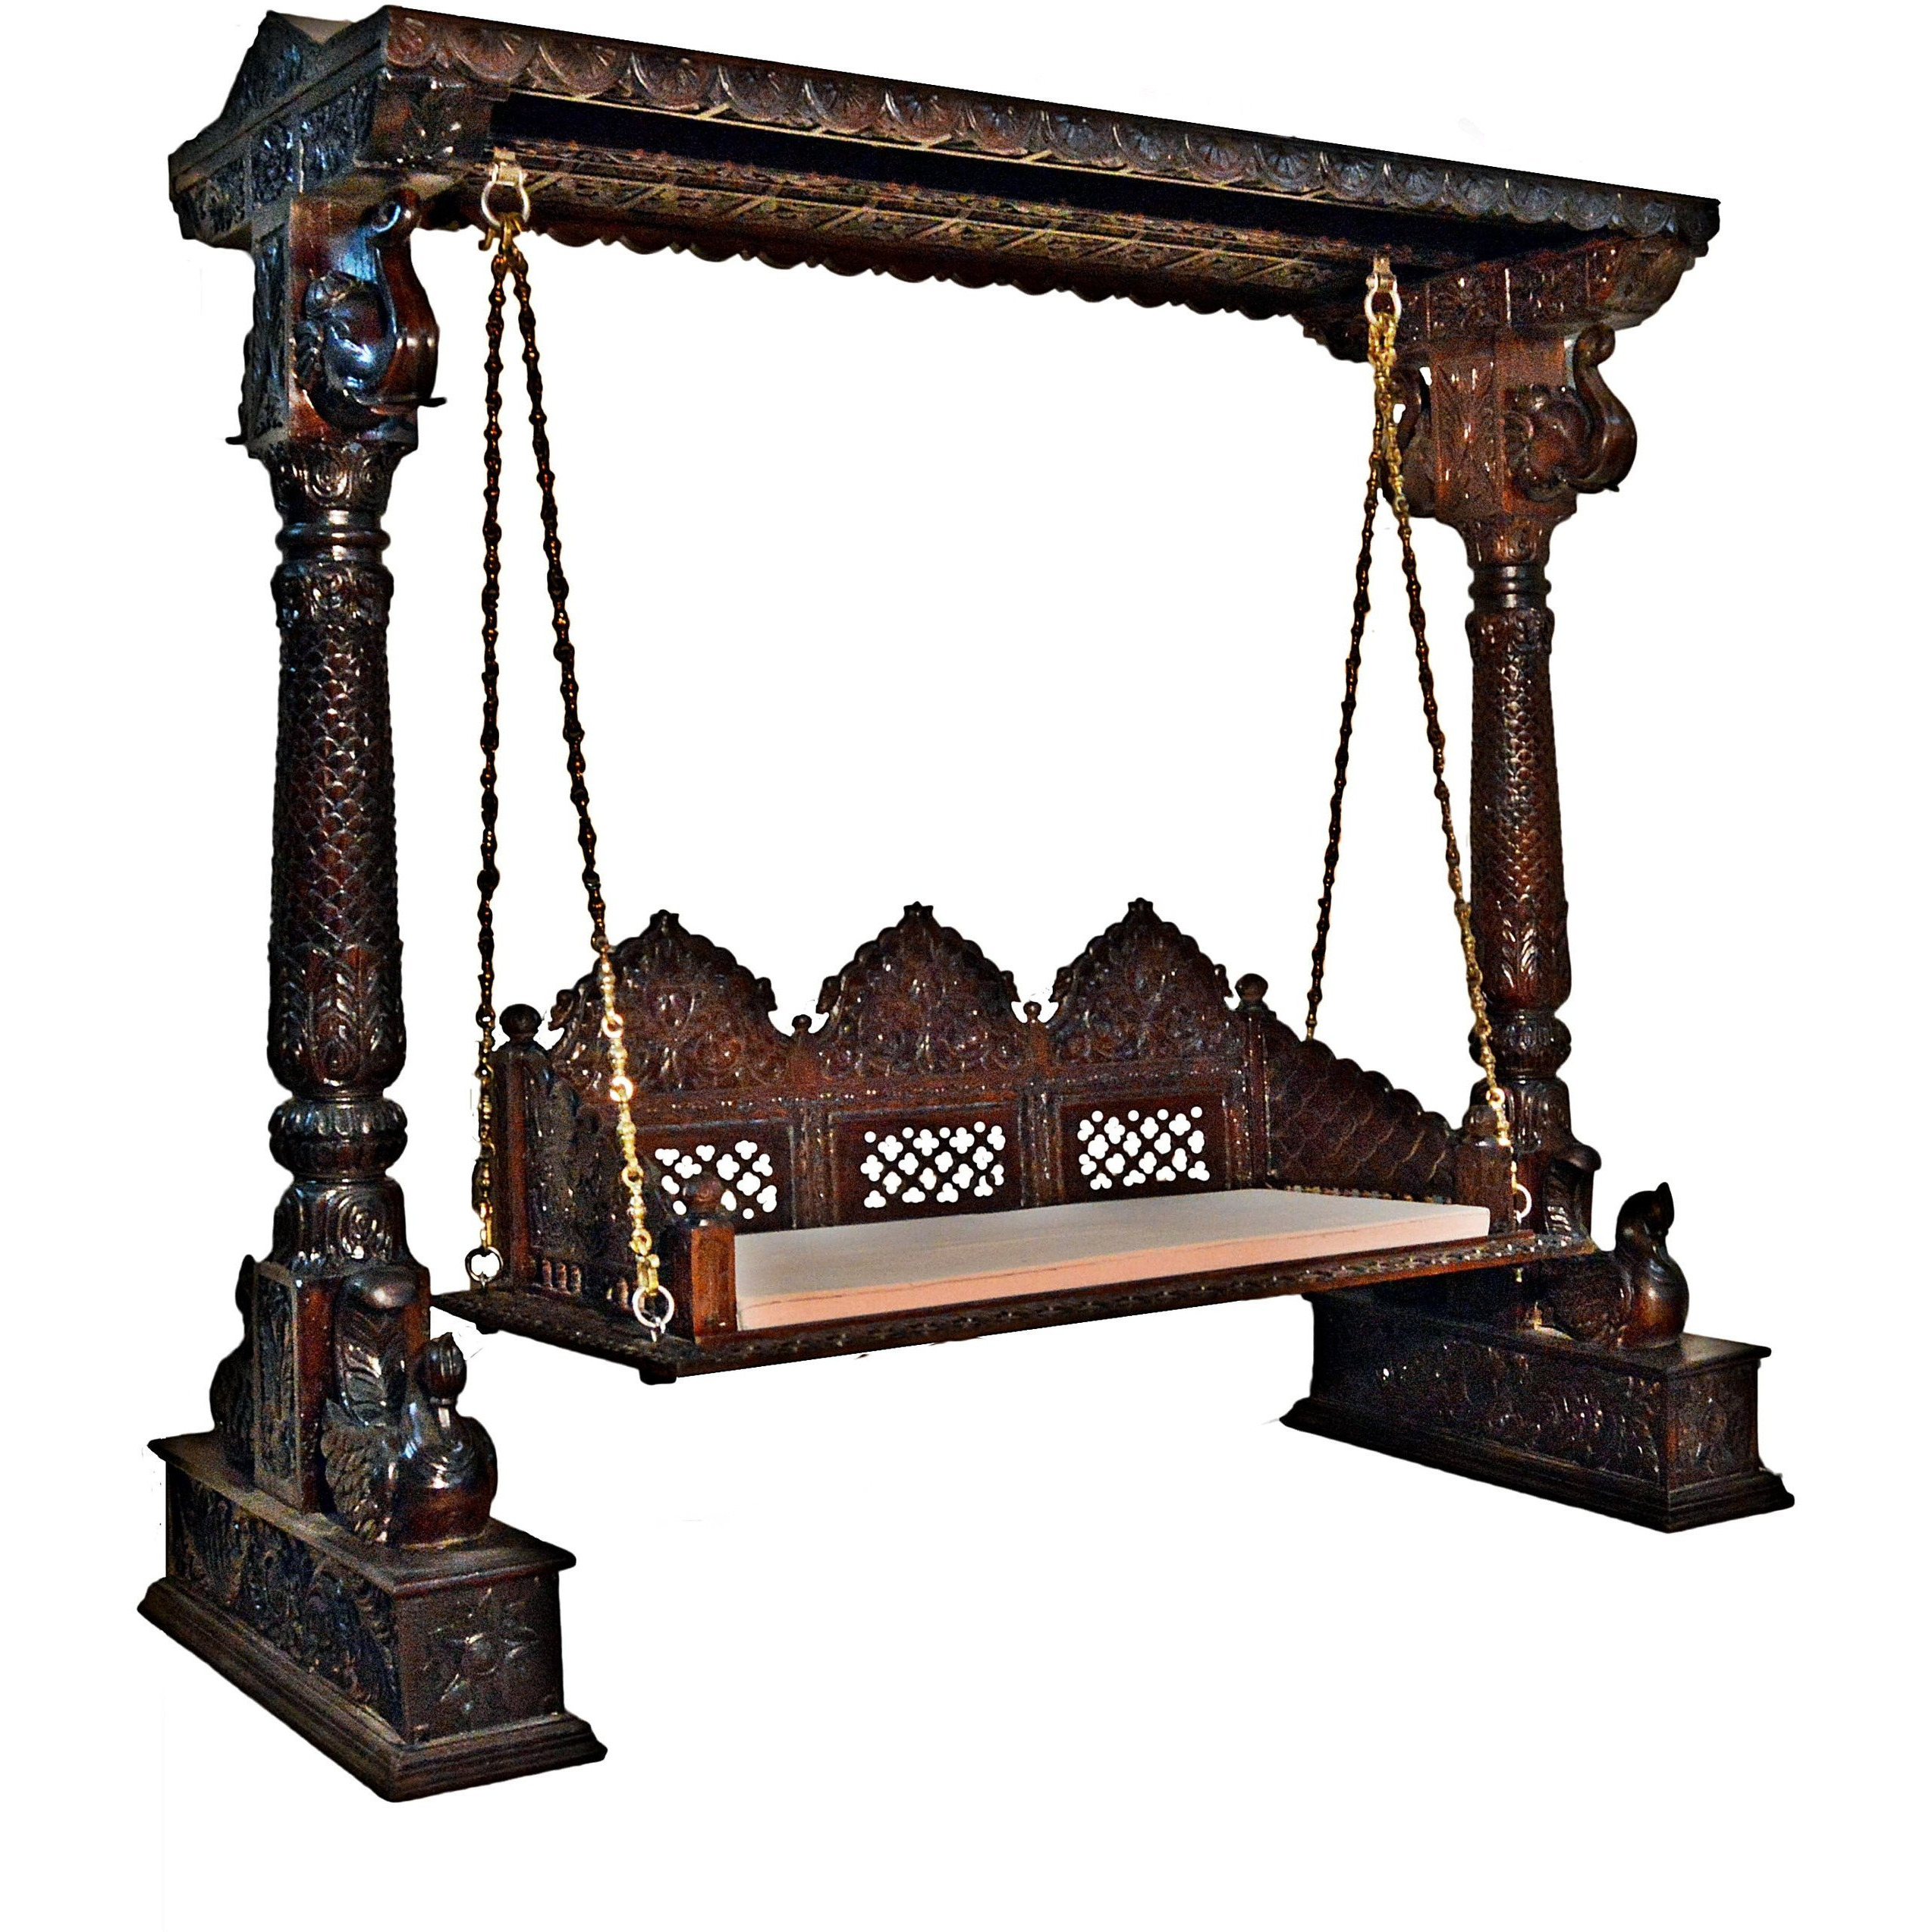 Carved Elephant & Peacock Brown Wooden Carved Royal Swing Set / Indoor Jhula